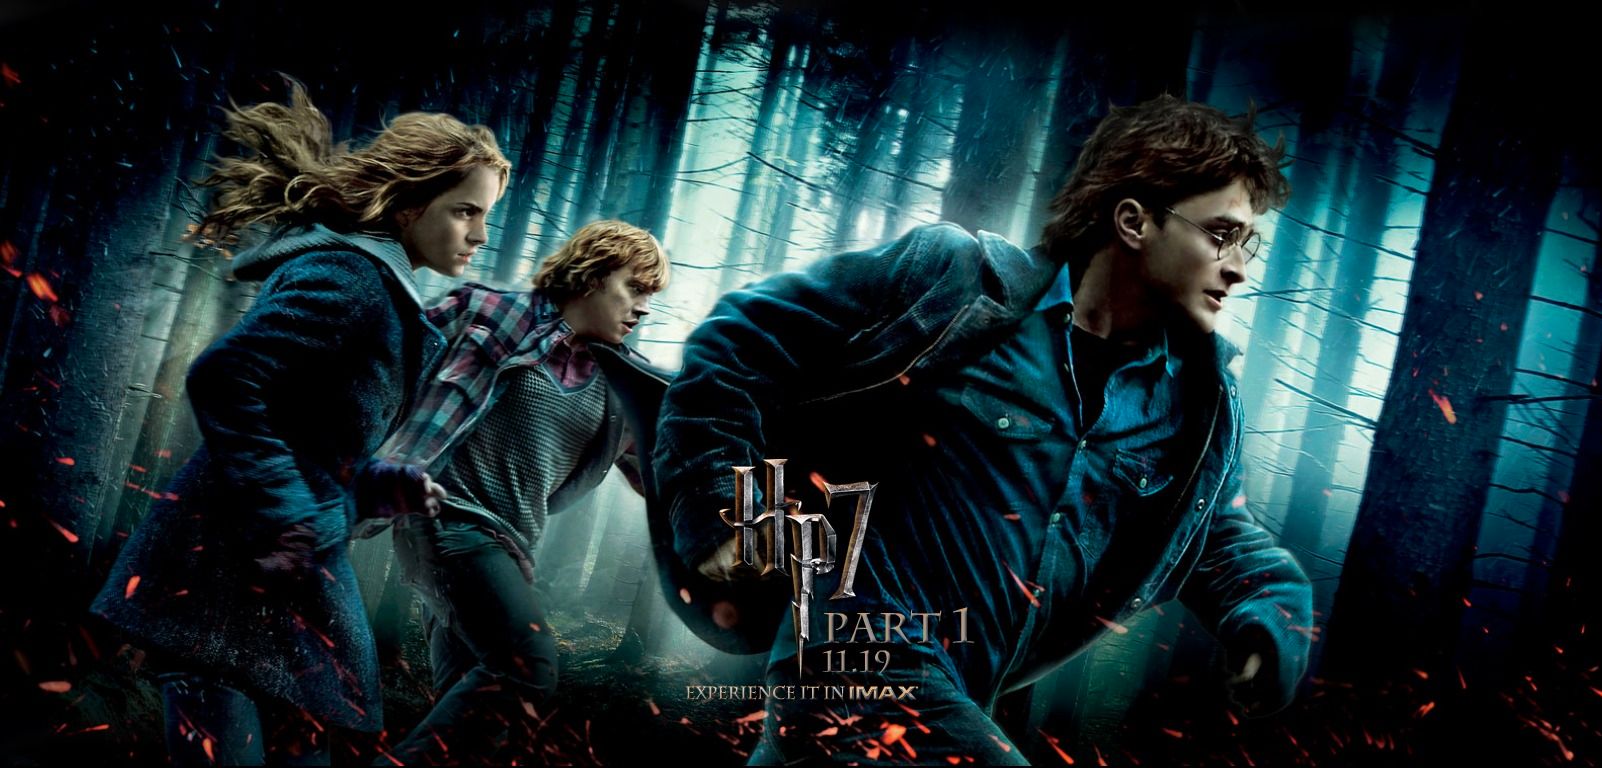 Harry Potter and the Deathly Hallows - Part 1 Website